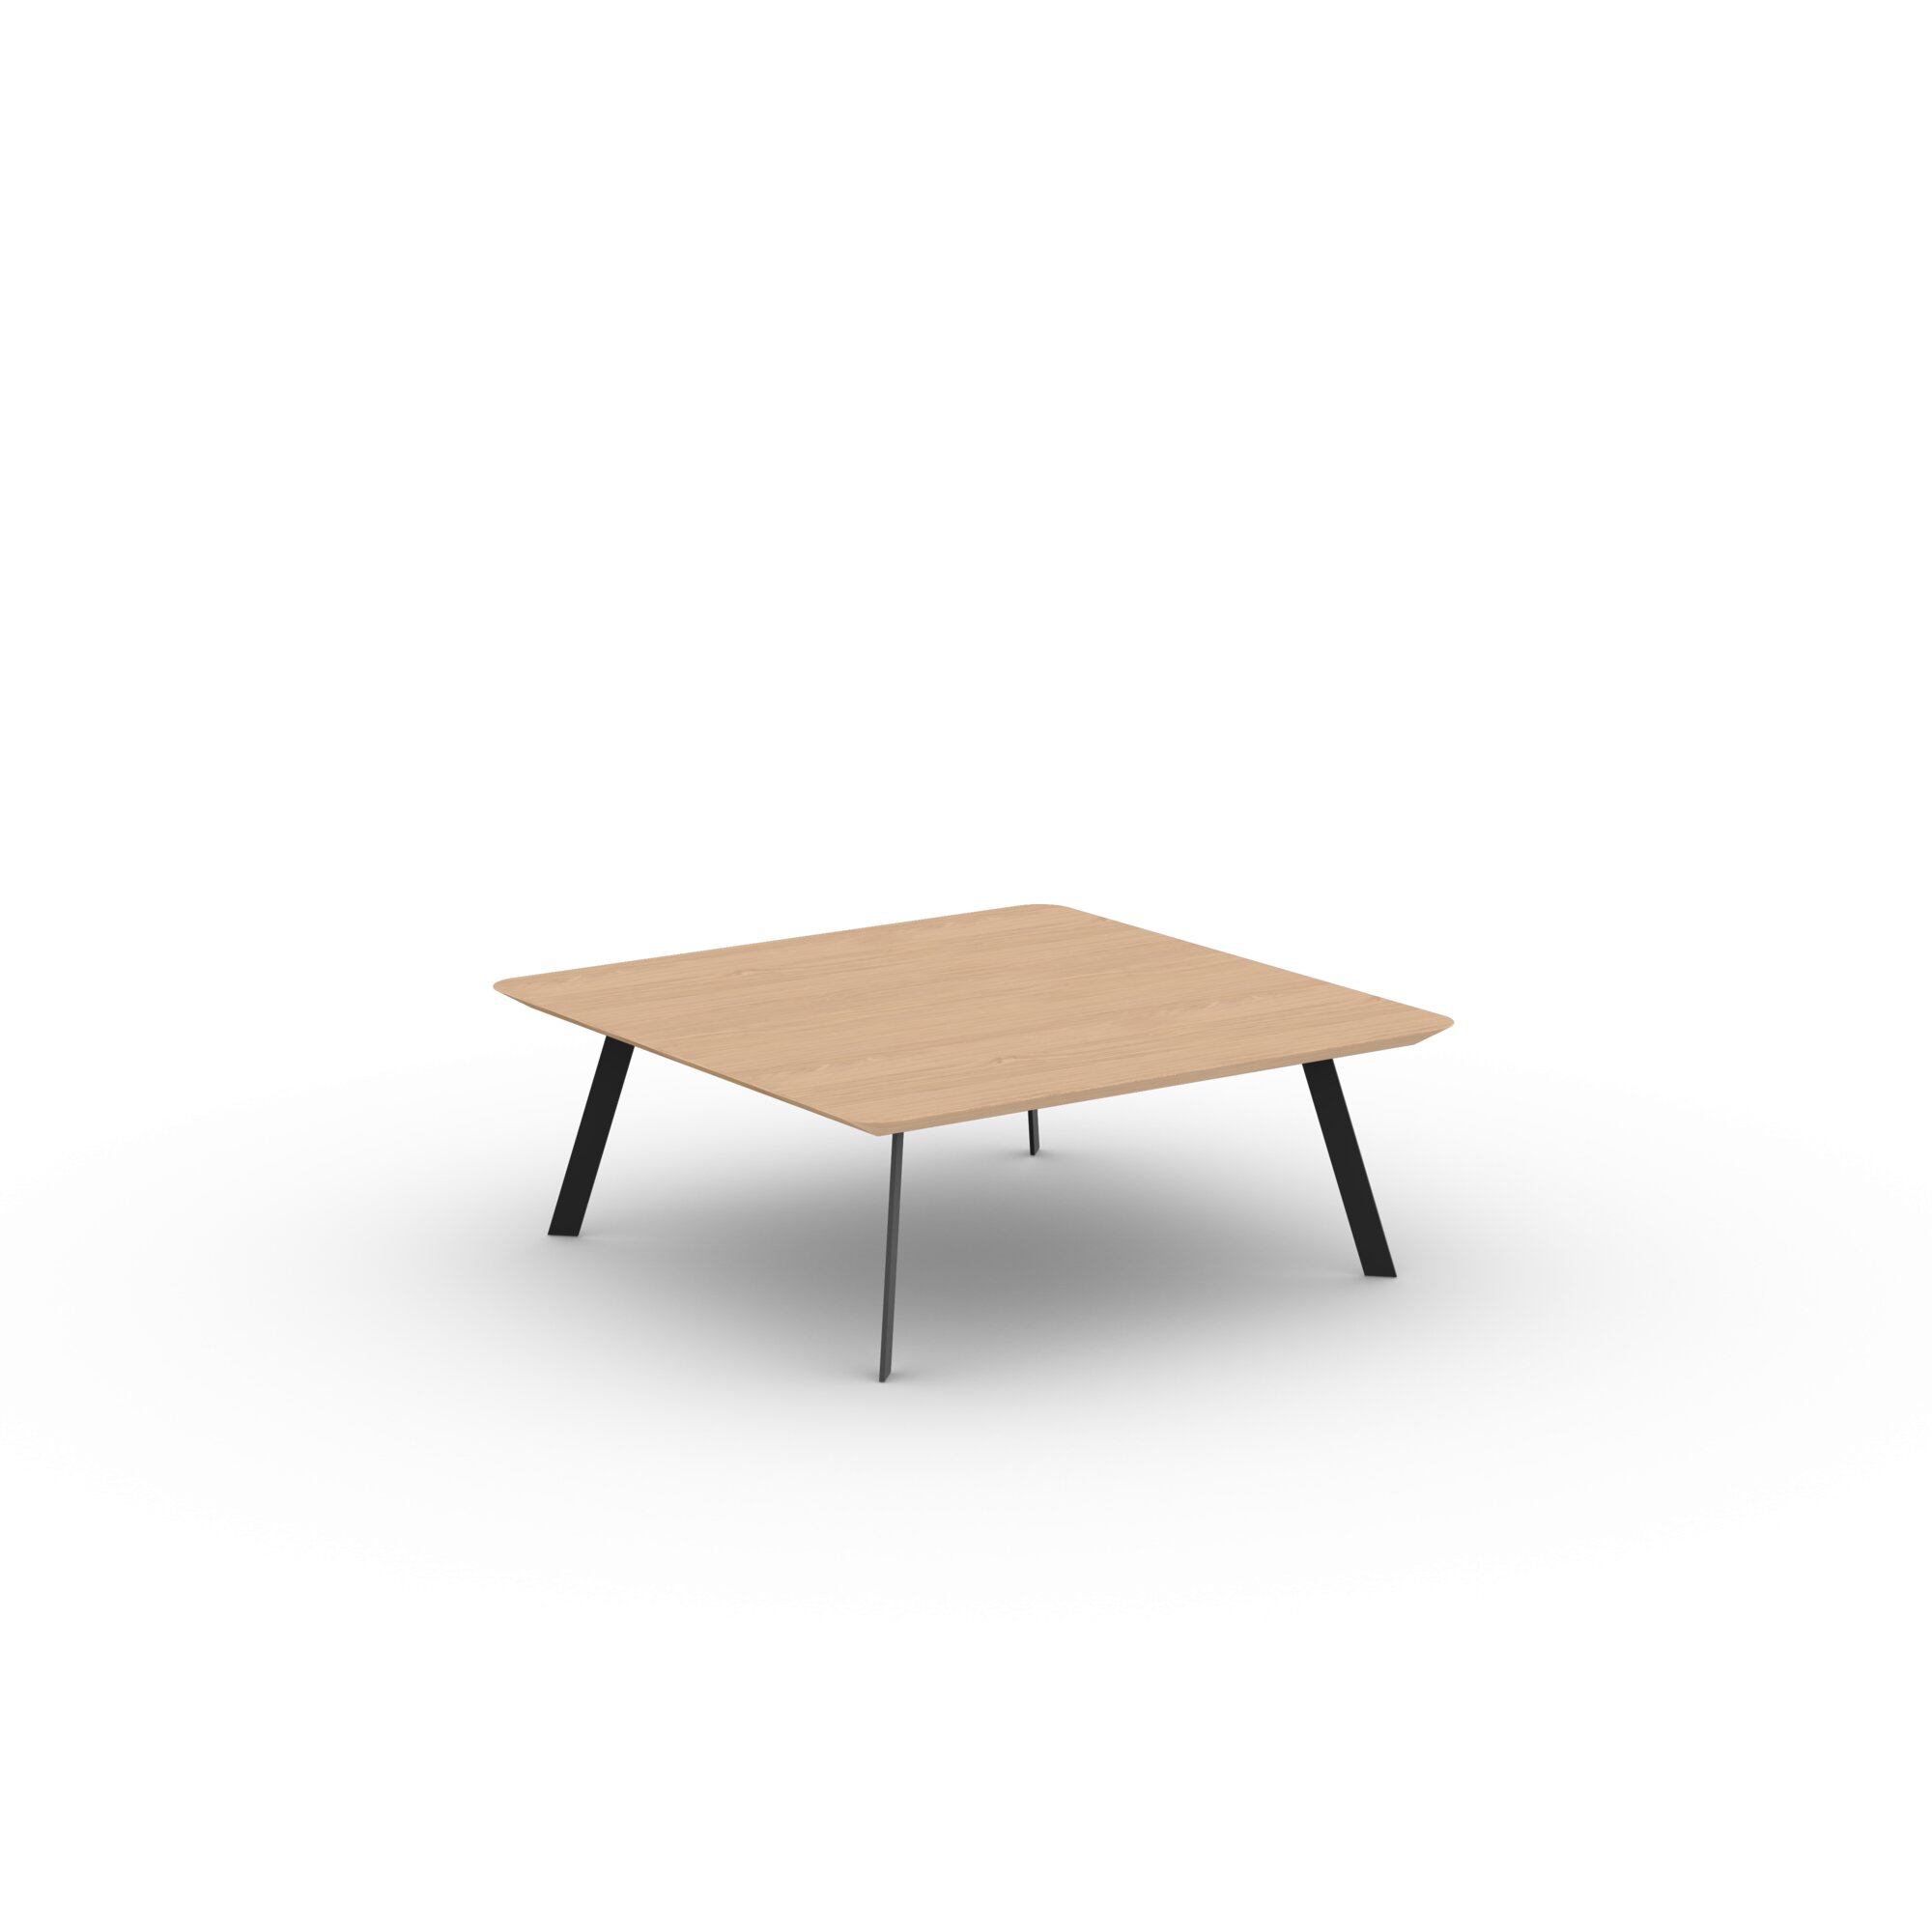 Design Coffee Table | New Co Coffee Table 90 Square Black | Oak hardwax oil natural light 3041 | Studio HENK| 